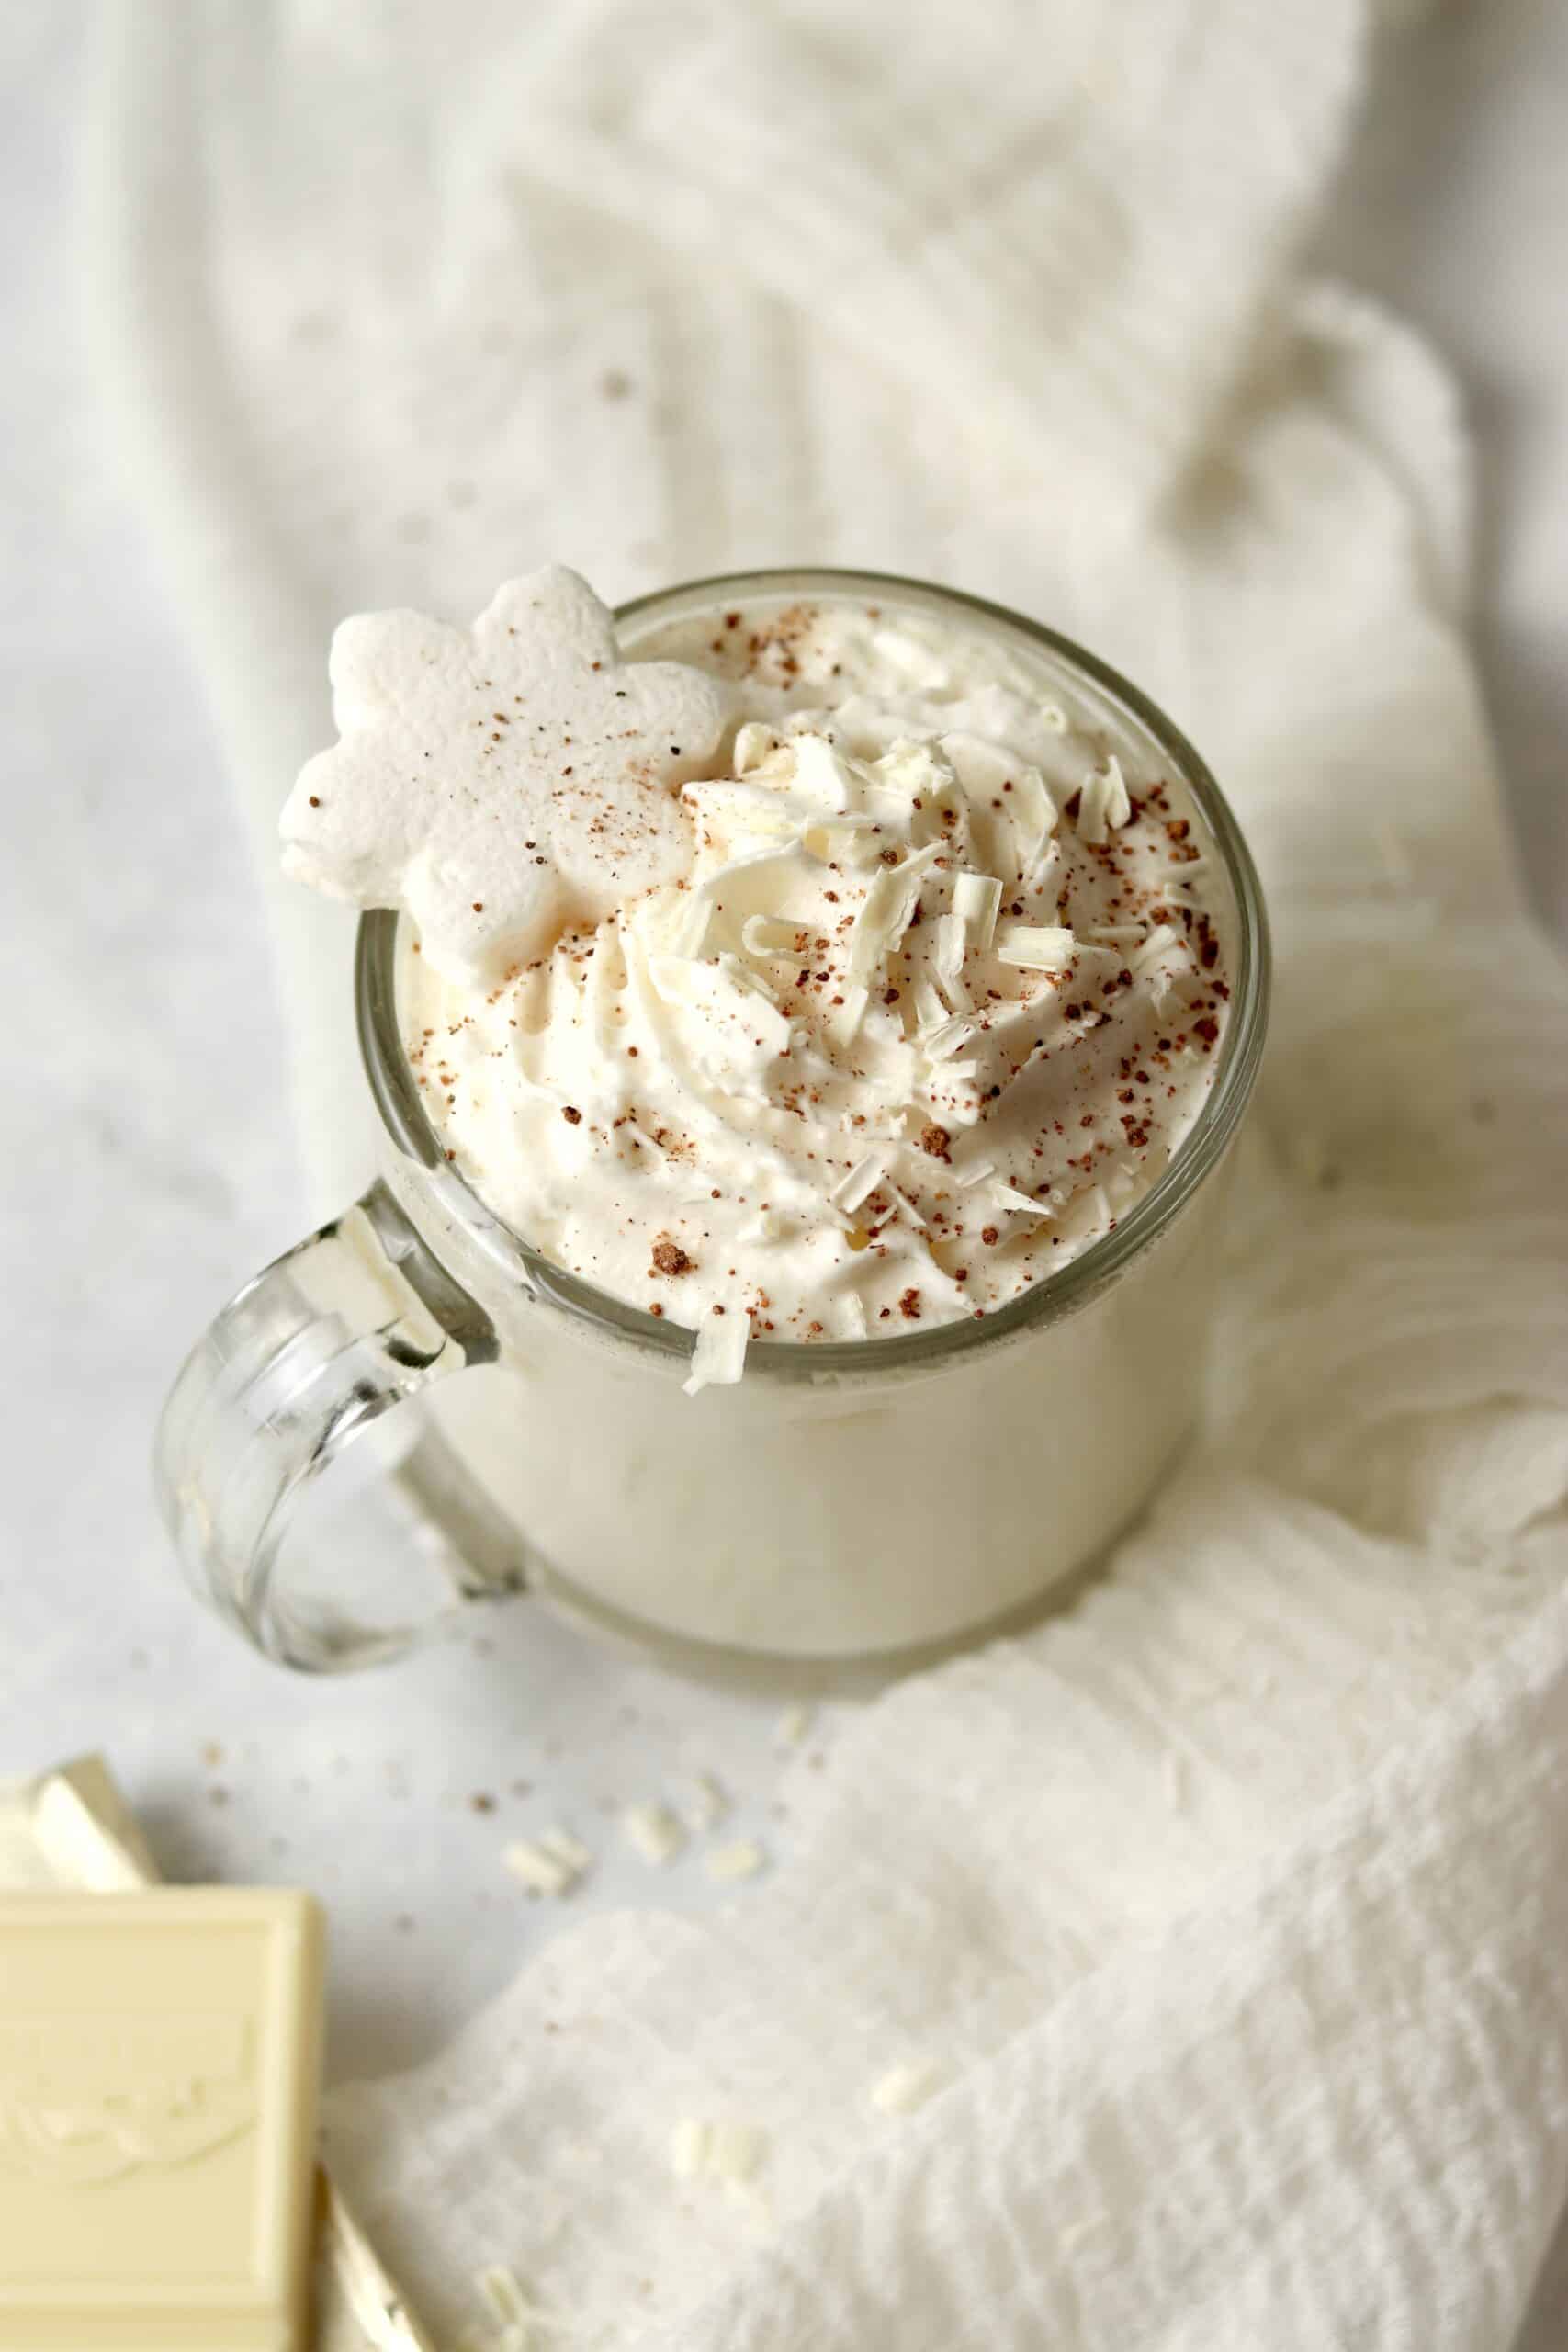 Copycat Starbucks White Hot Chocolate in a glass mug with whipped cream.